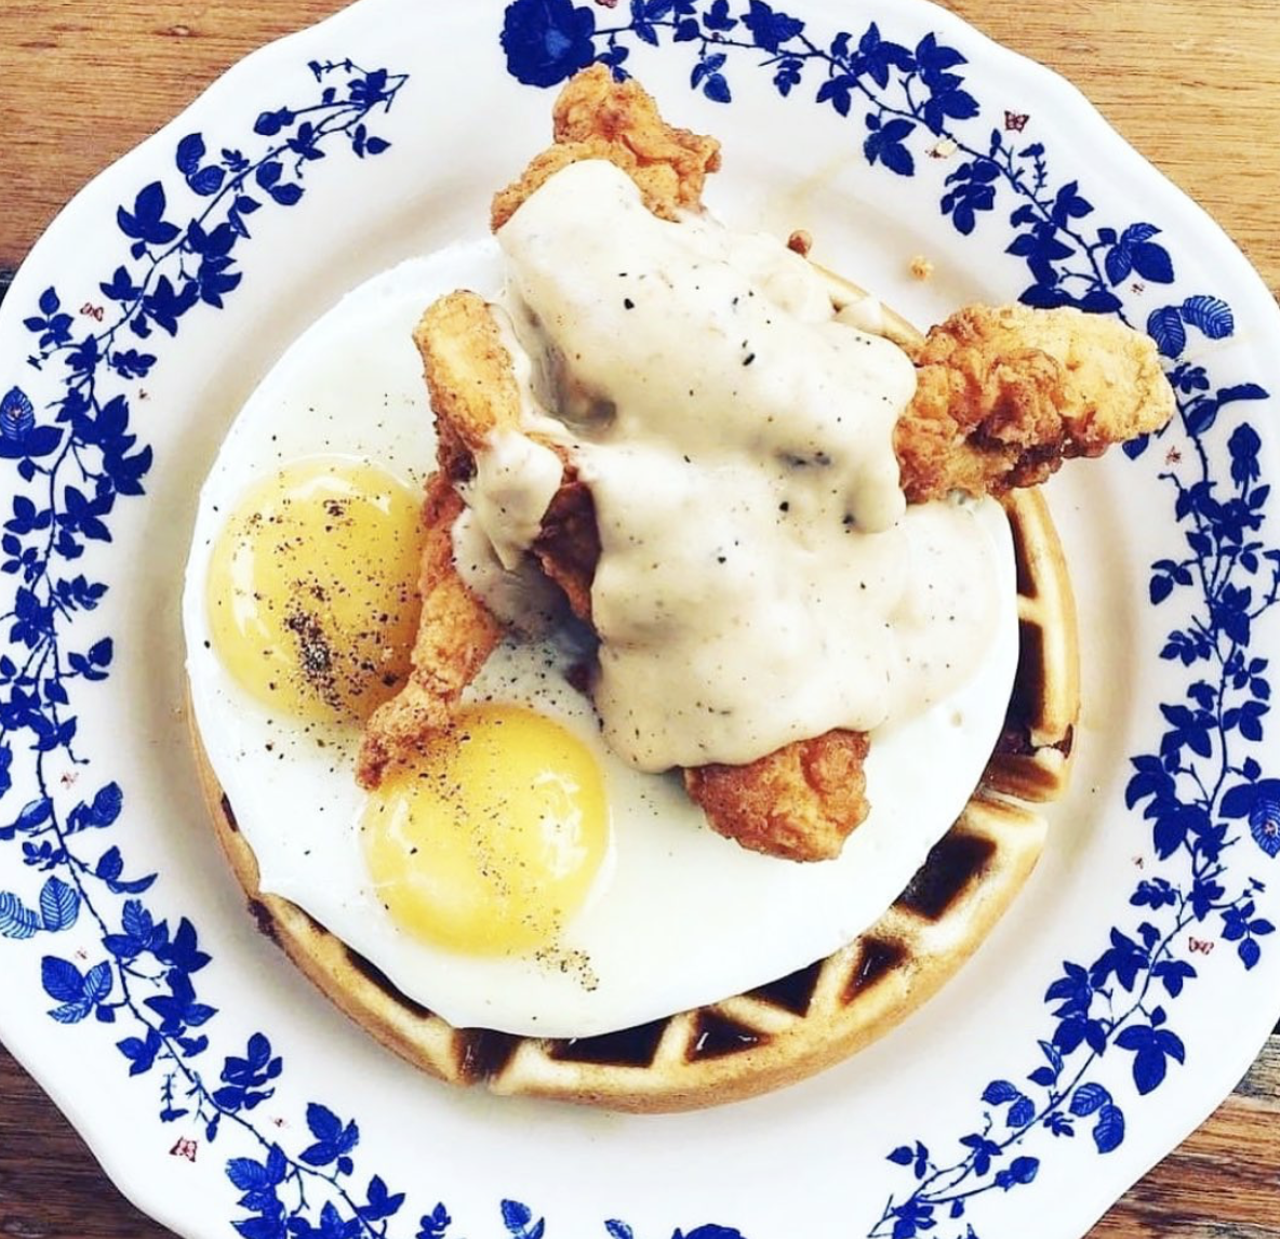 Ida Claire
7300 Jones Maltsberger Rd, (210) 667-2145, ida-claire.com
If brunch with a little bit of southern hospitality charm is your jam, post up at a table at Ida Claire, where authentic comfort food meets an elevated experience. 
Photo via Instagram / idaclairesa